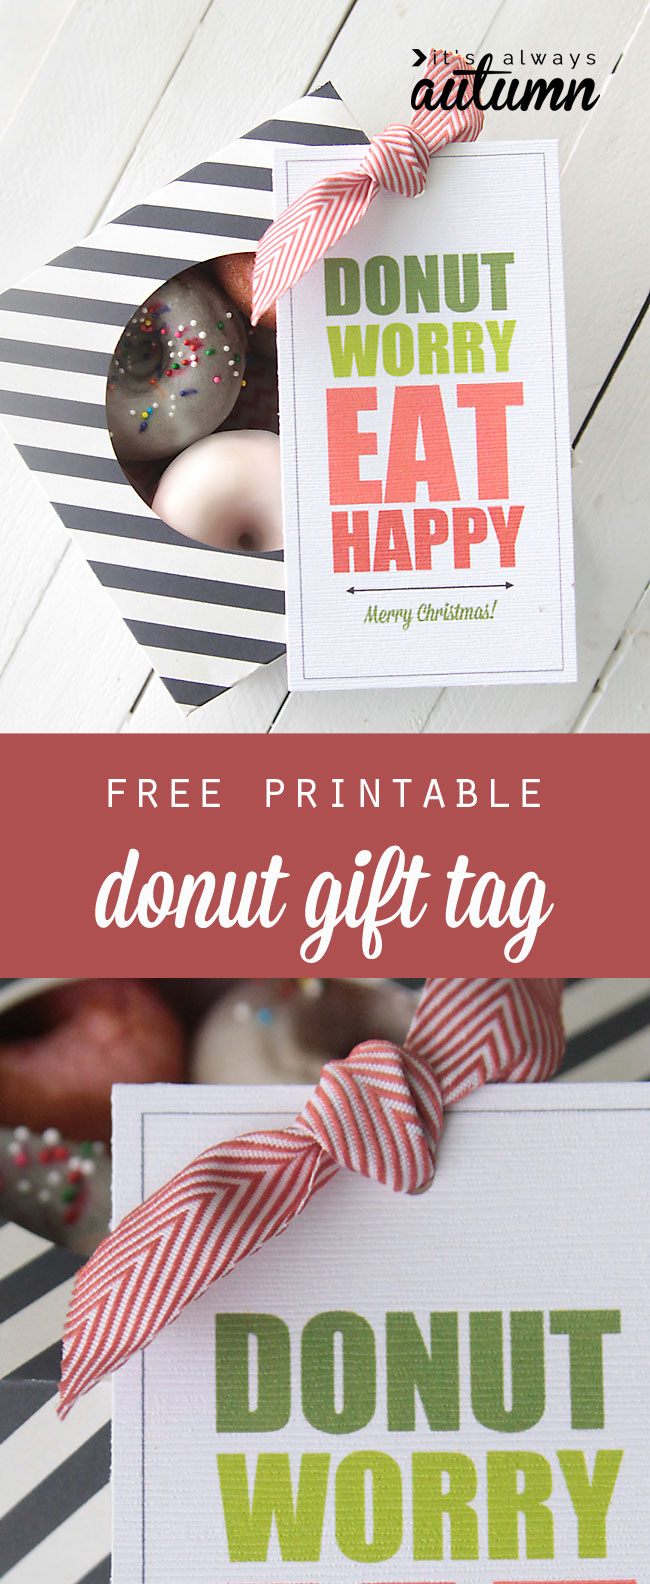 donut-worry-eat-happy-free-printable-donut-gift-tags-its-always-donut-thank-you-note-tags-we